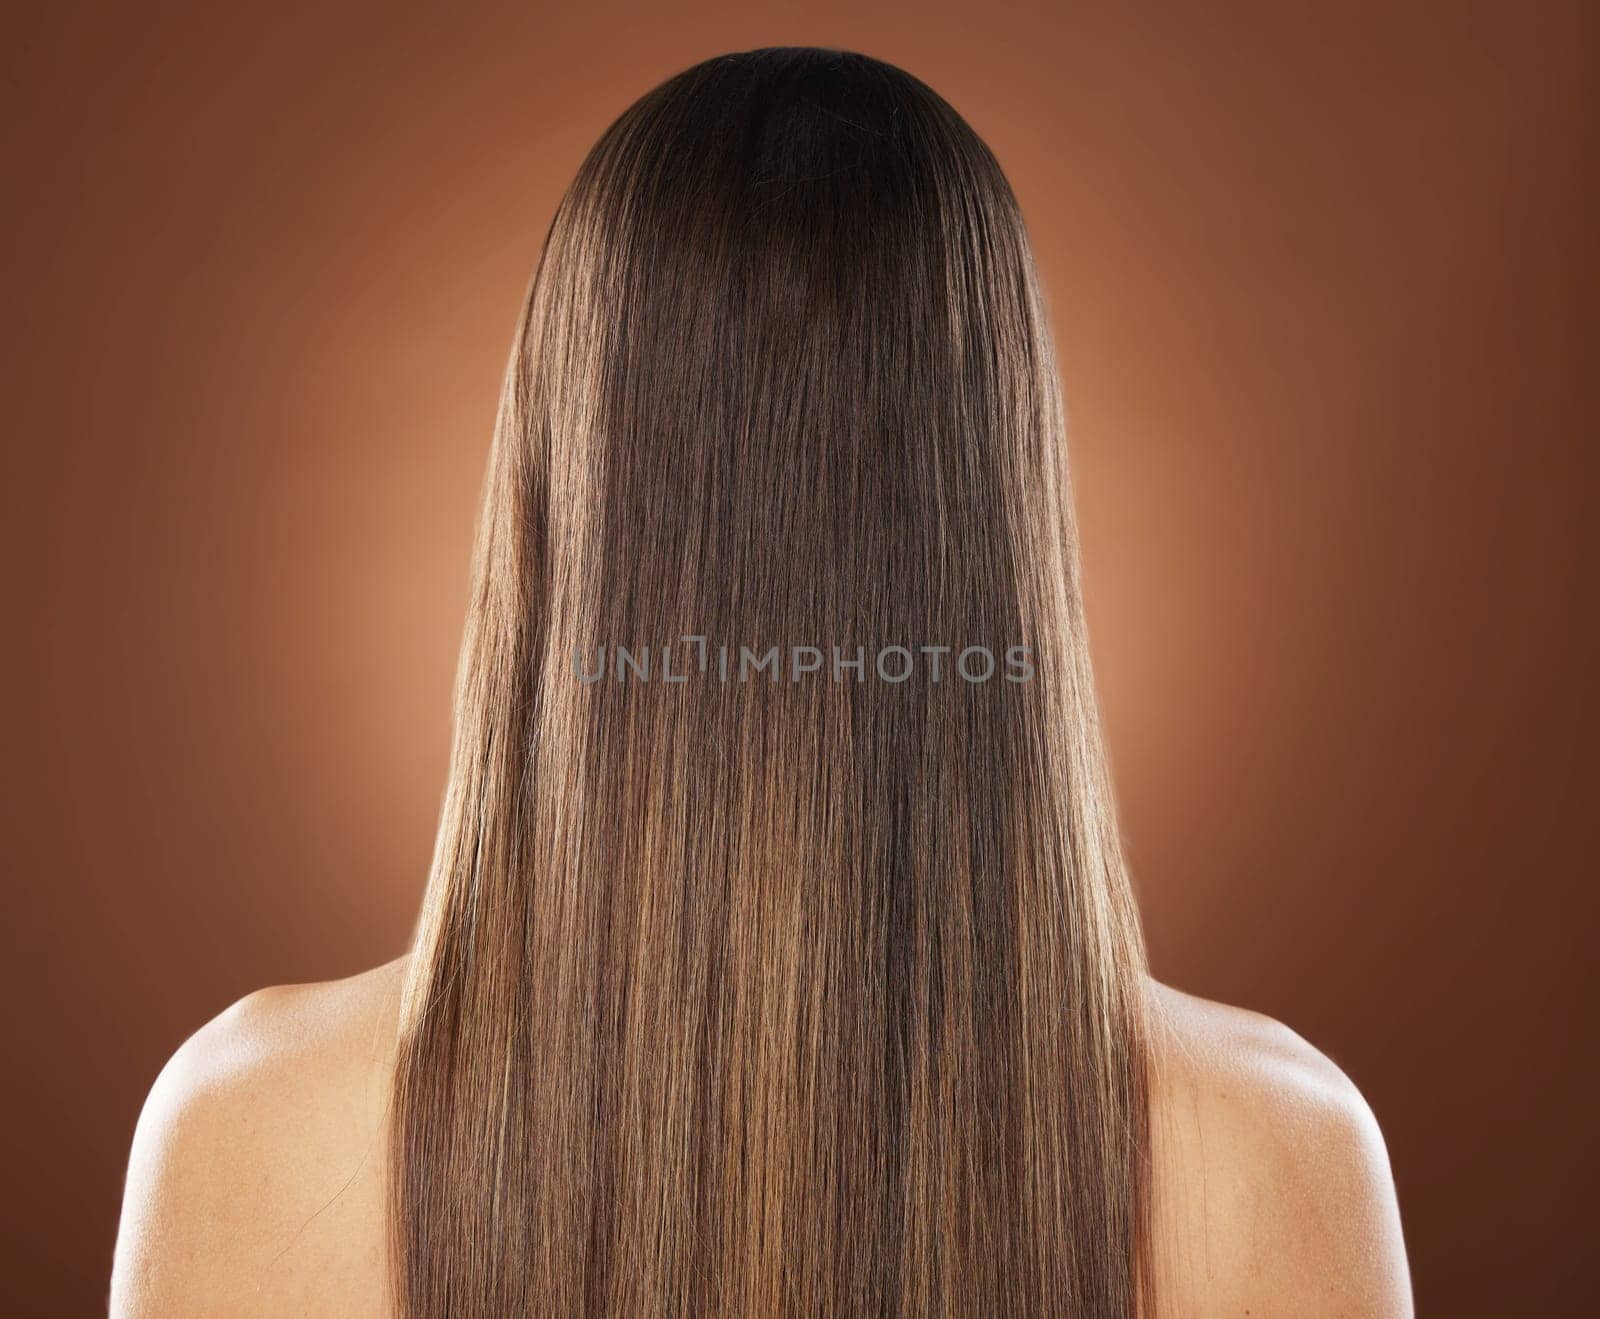 Woman, back or hair style on brown background in relax studio for keratin treatment, self care wellness or color dye routine. Model, texture or brunette growth aesthetic with balayage transformation by YuriArcurs